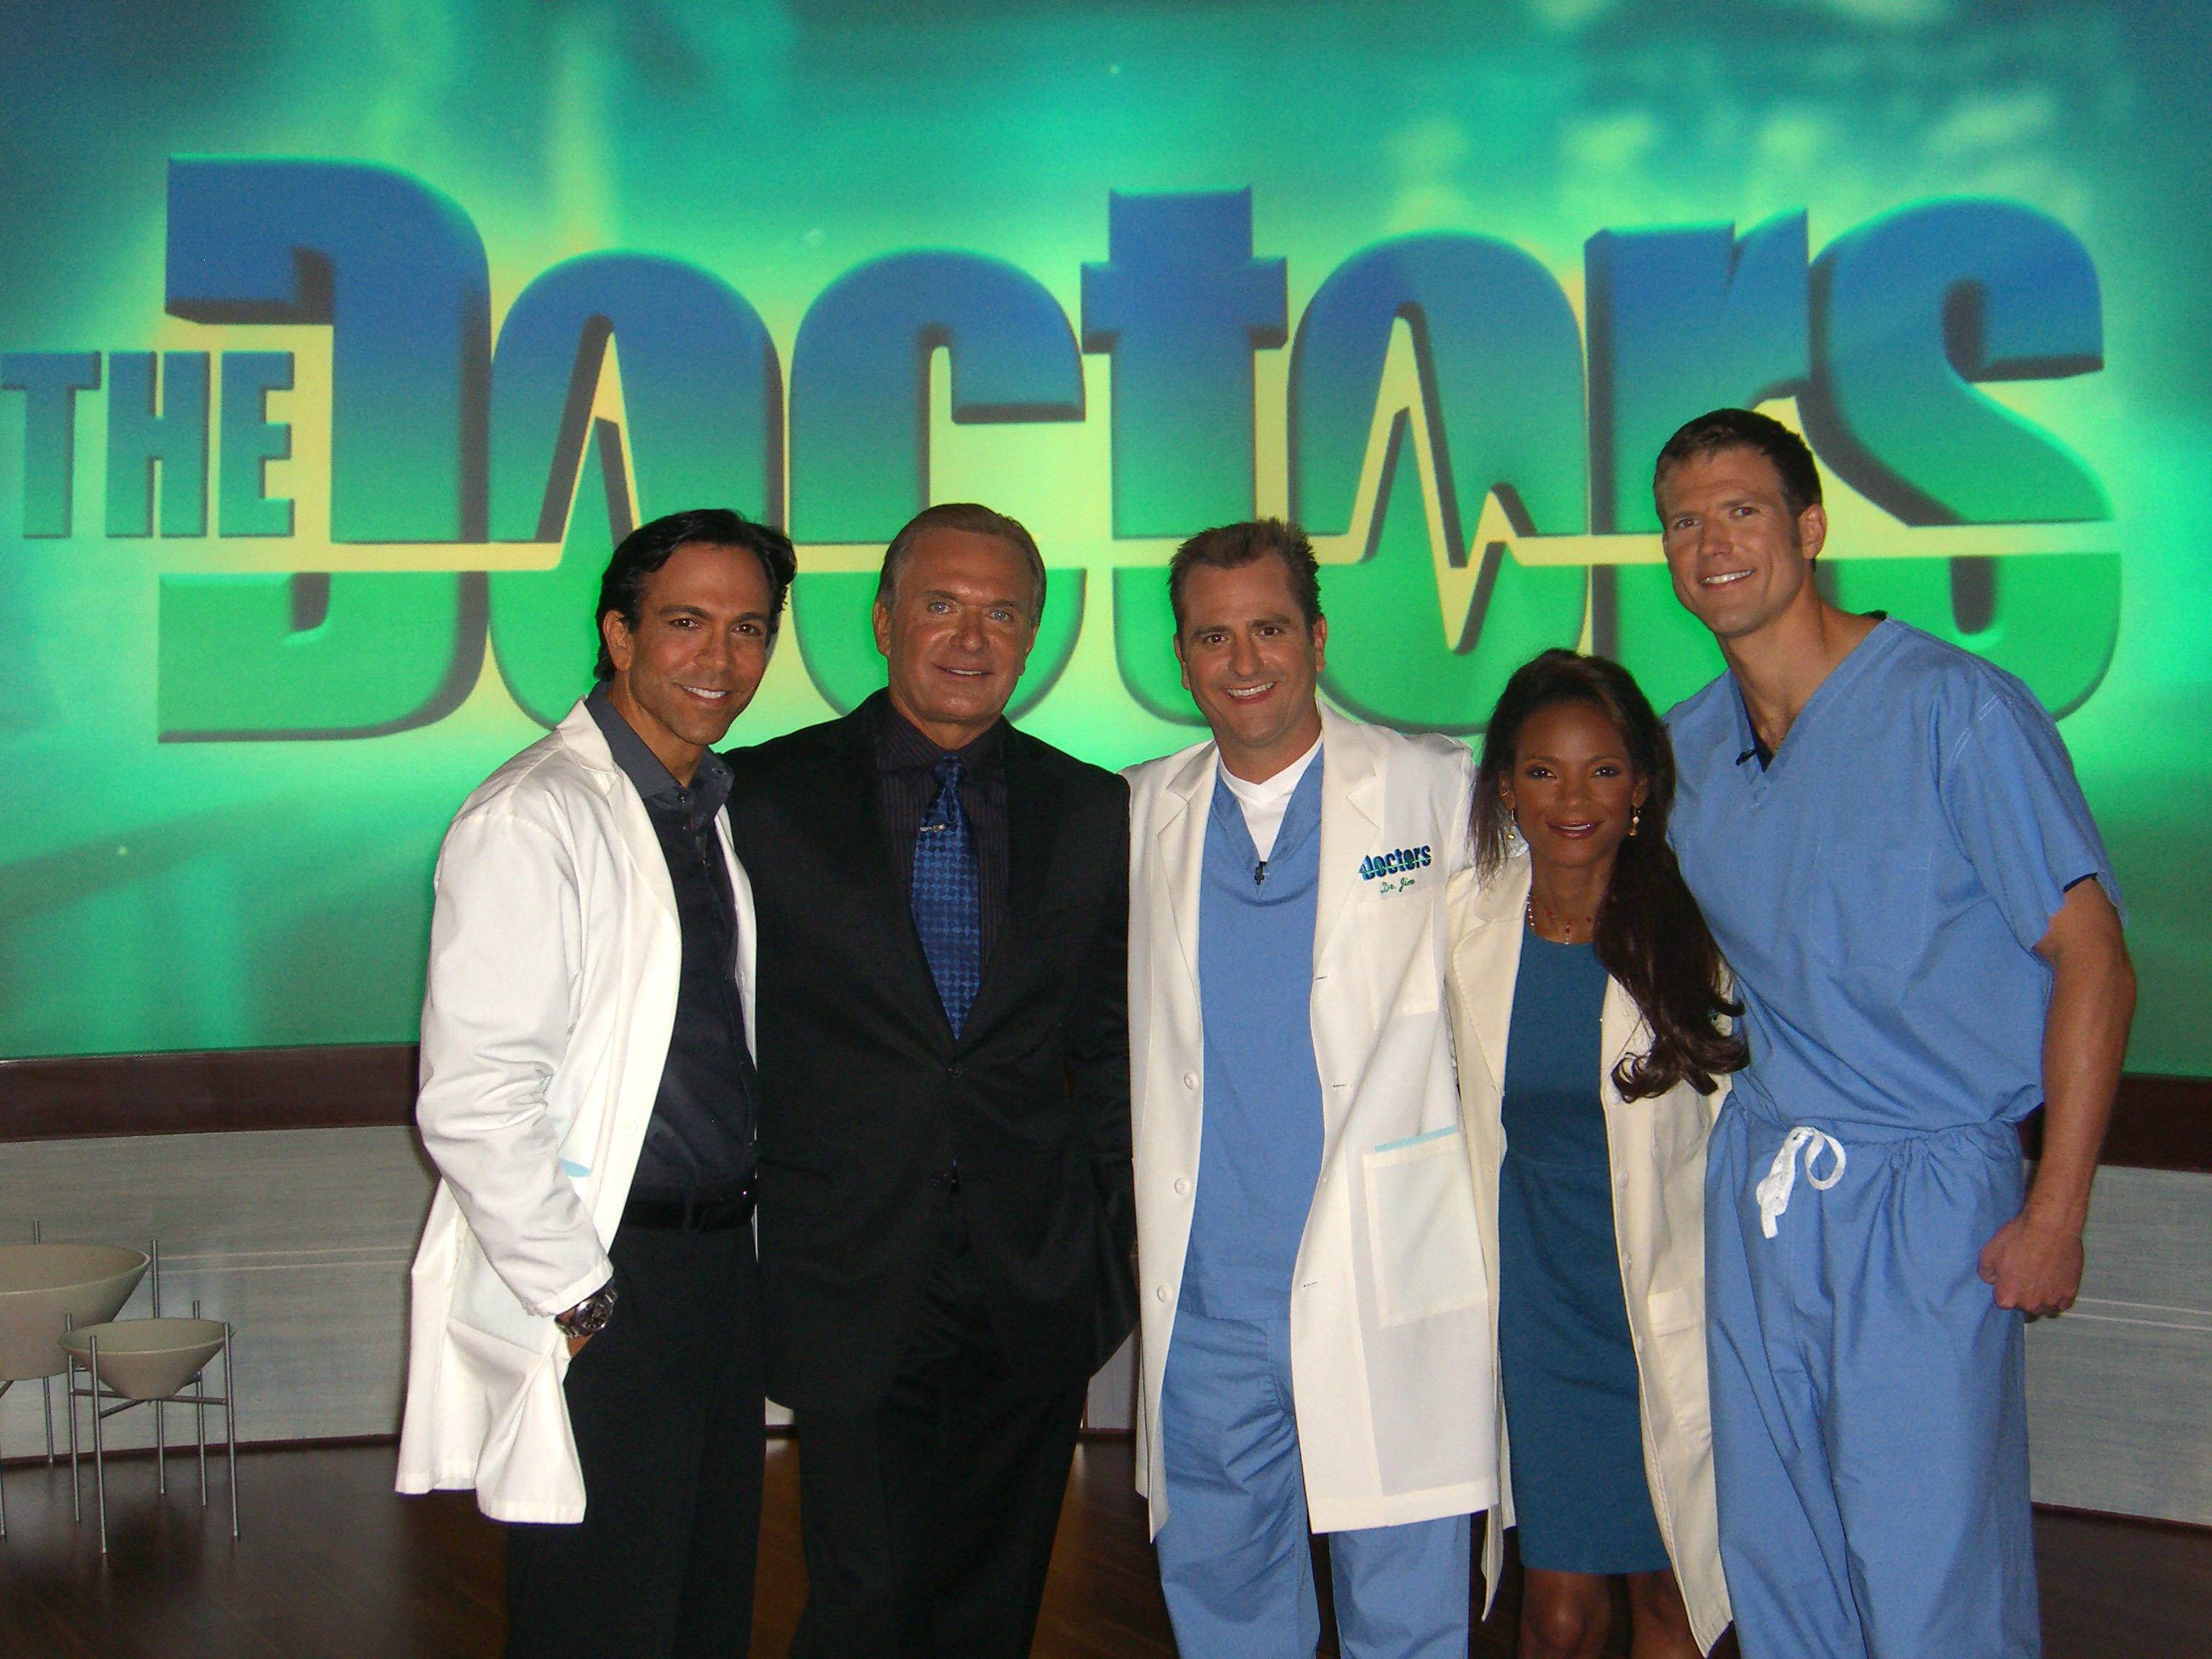 Dr. Bill Dorfman with the co-hosts of 